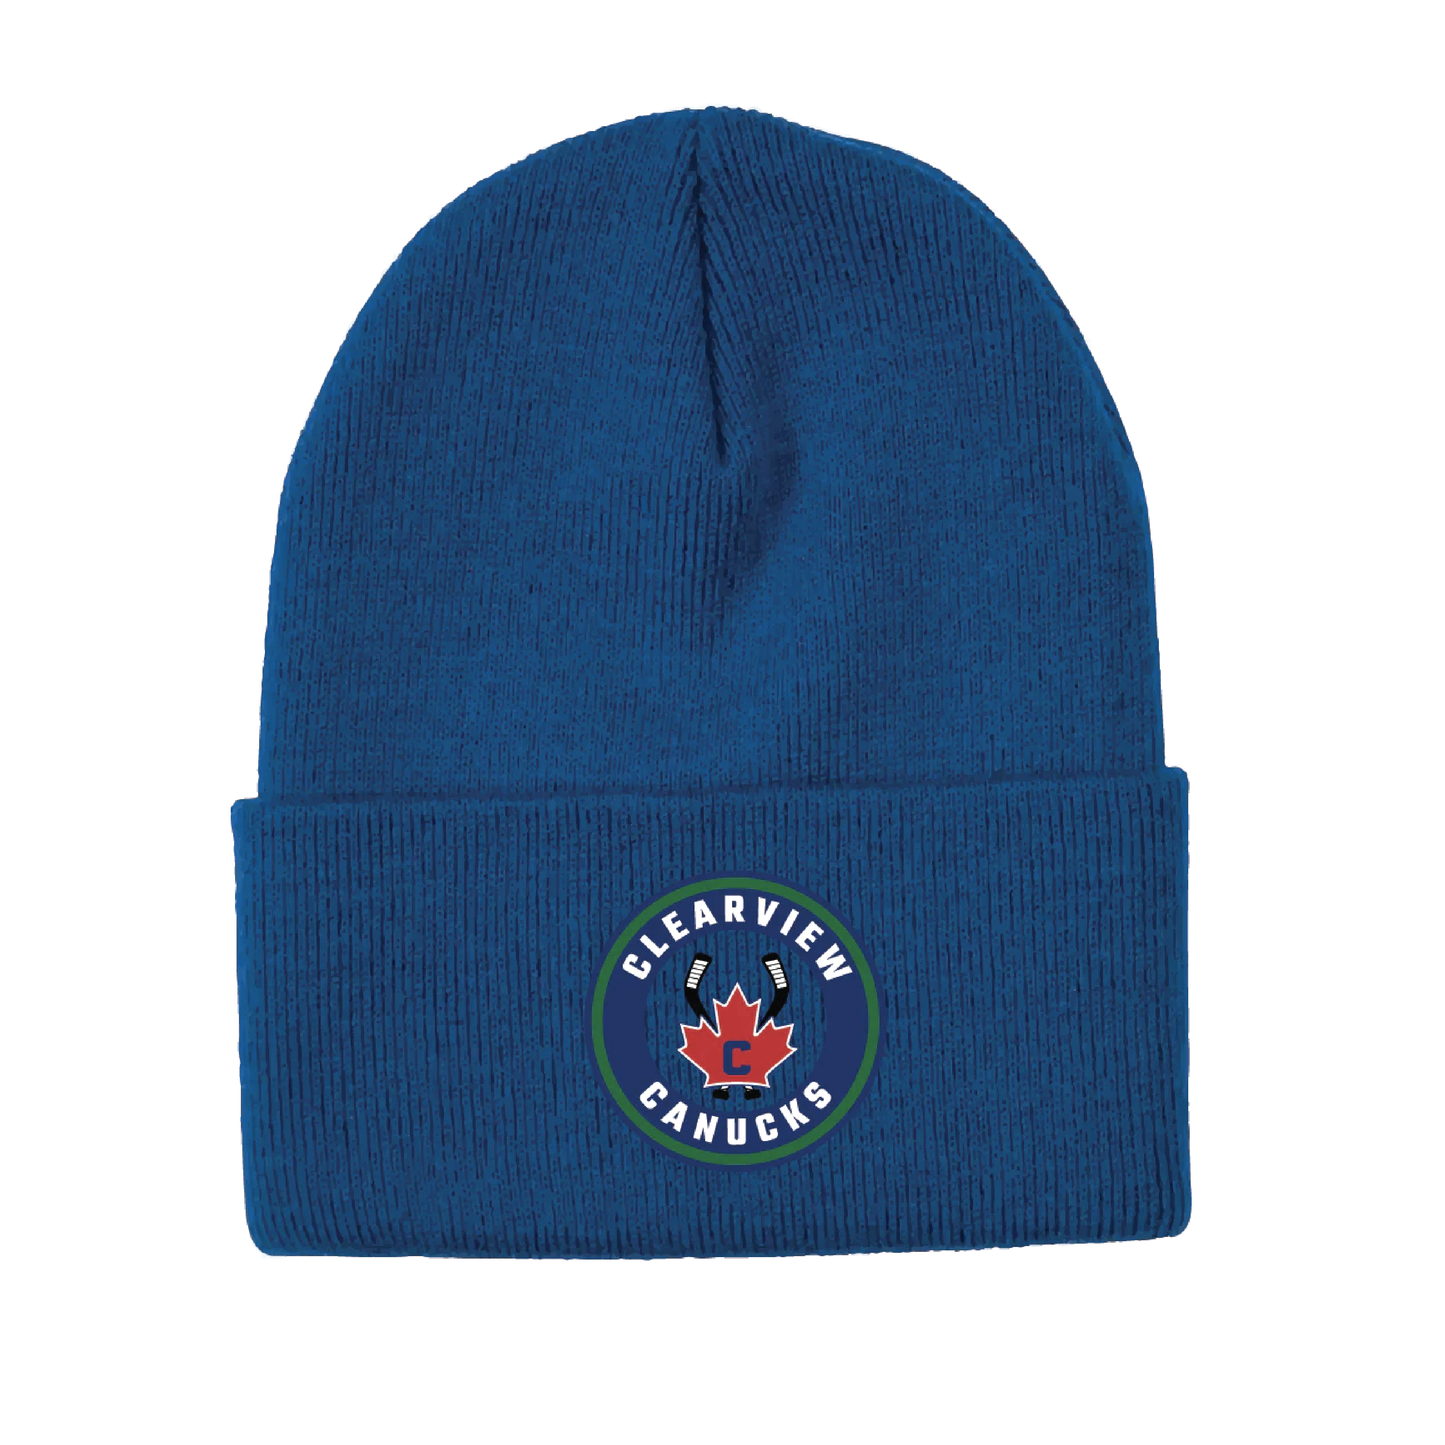 Clearview Canucks Toque